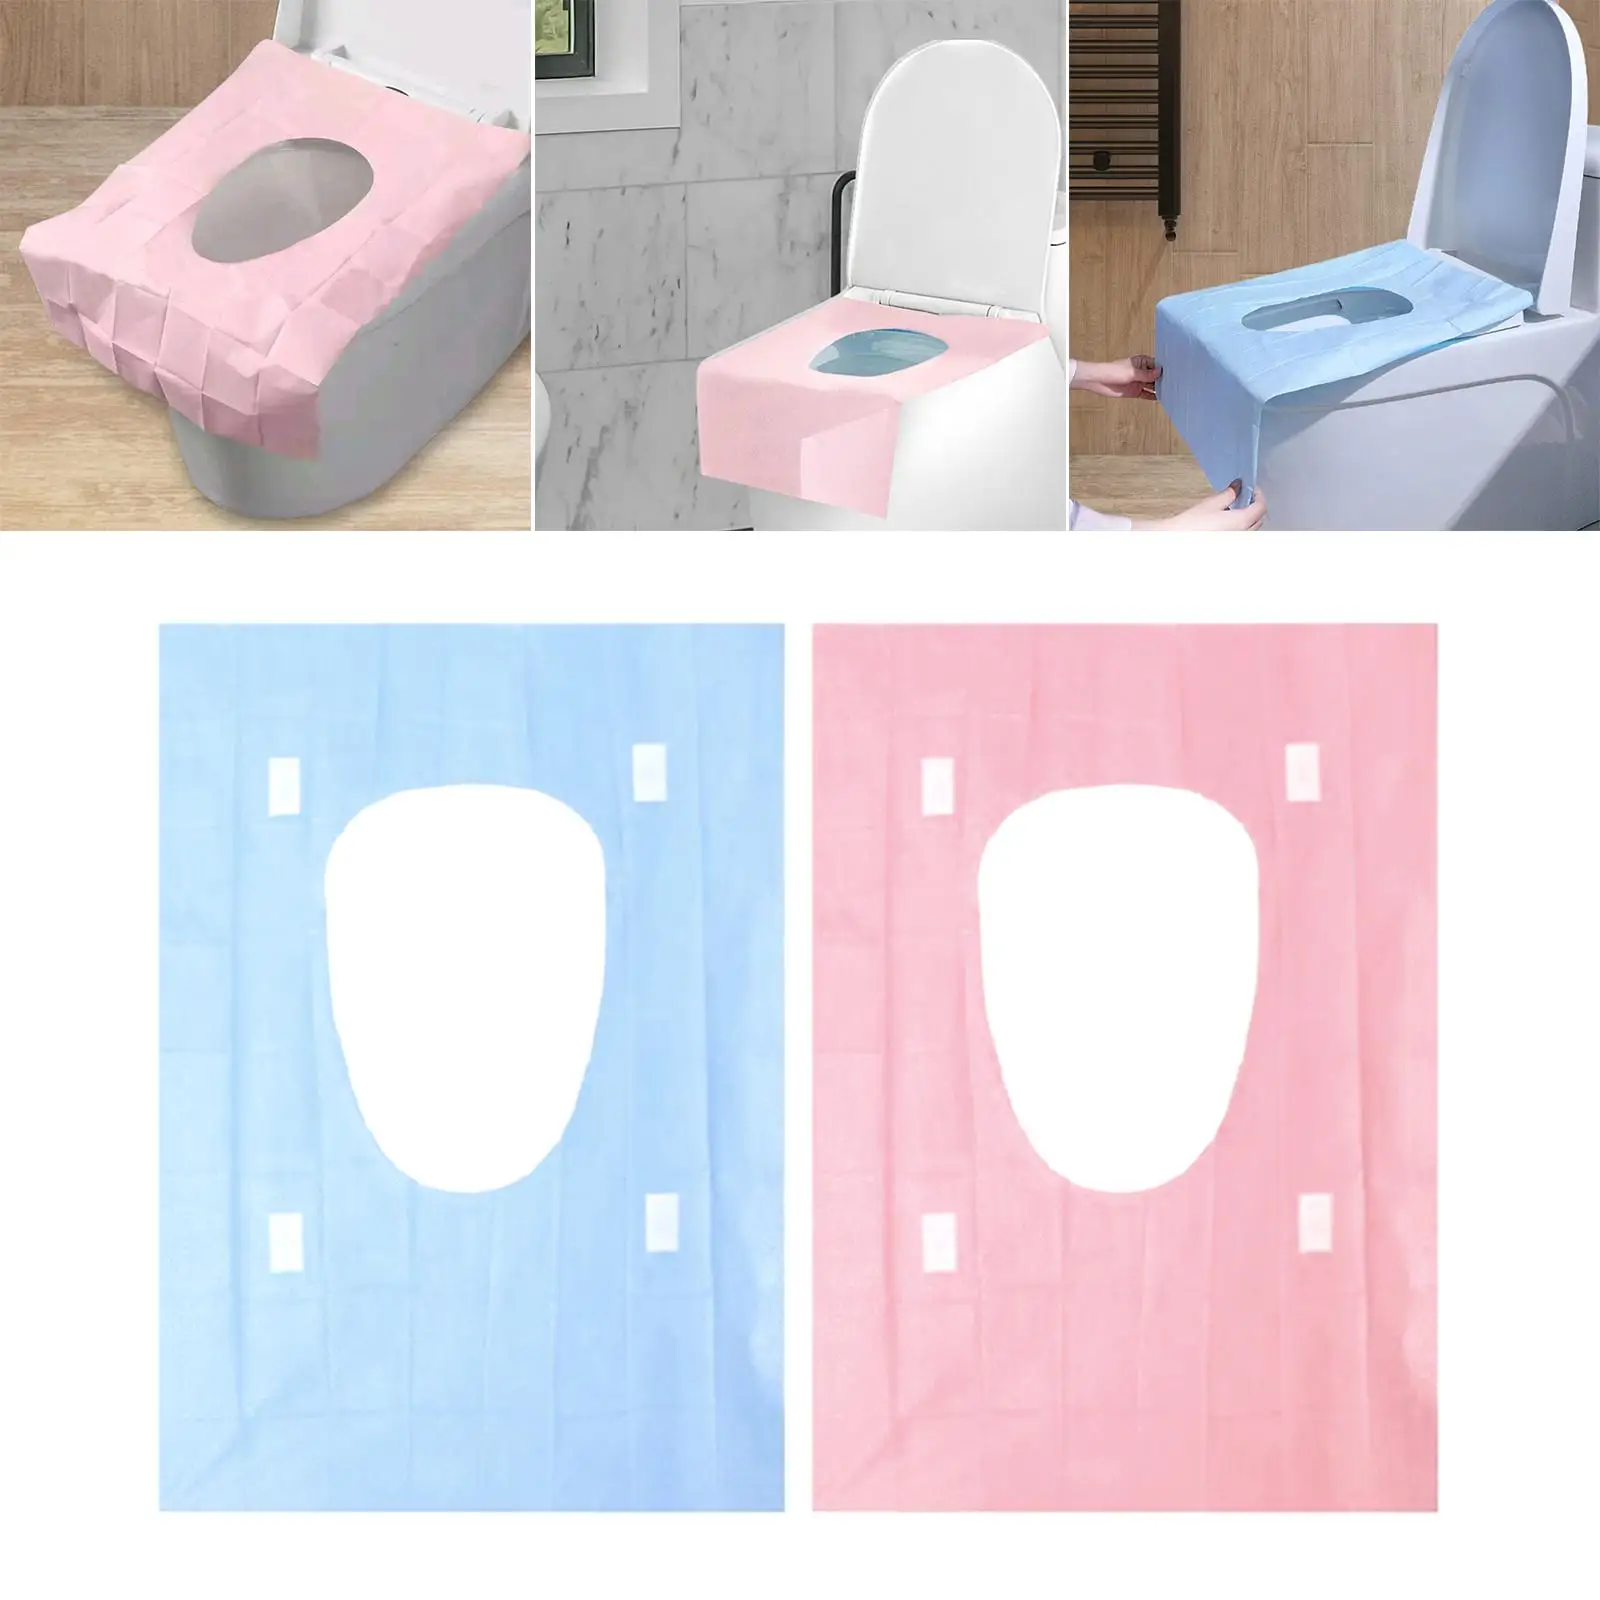 20Pcs Toilet Seat Covers Disposable 40Cmx60cm Travel Accessories Liners Nonslip for potty Camping Airplane Stations